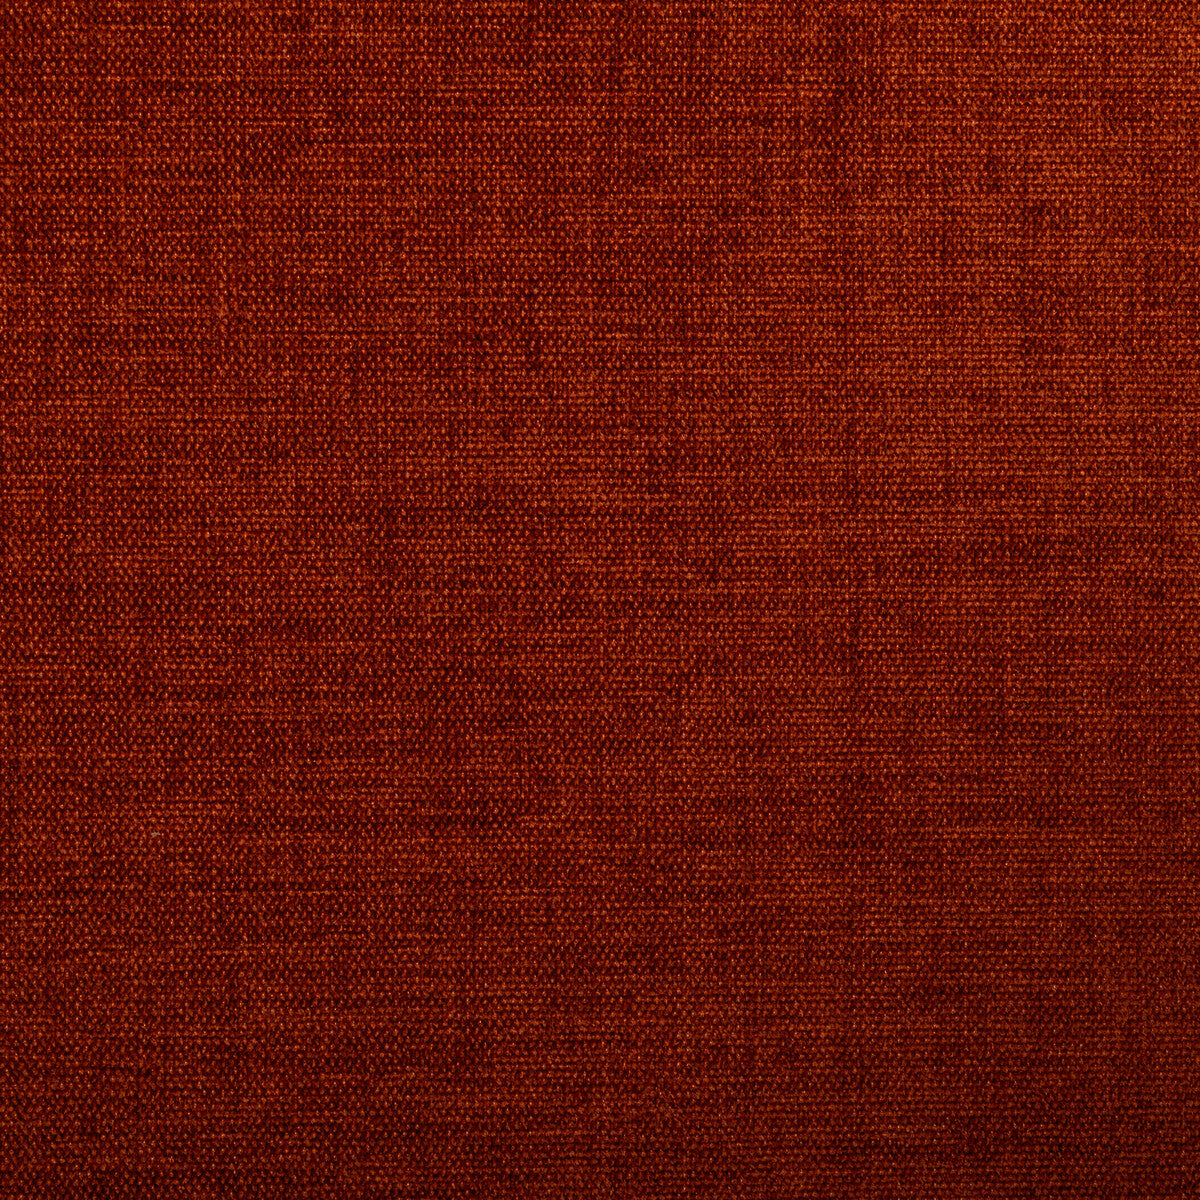 Kravet Contract fabric in 34961-212 color - pattern 34961.212.0 - by Kravet Contract in the Performance Kravetarmor collection